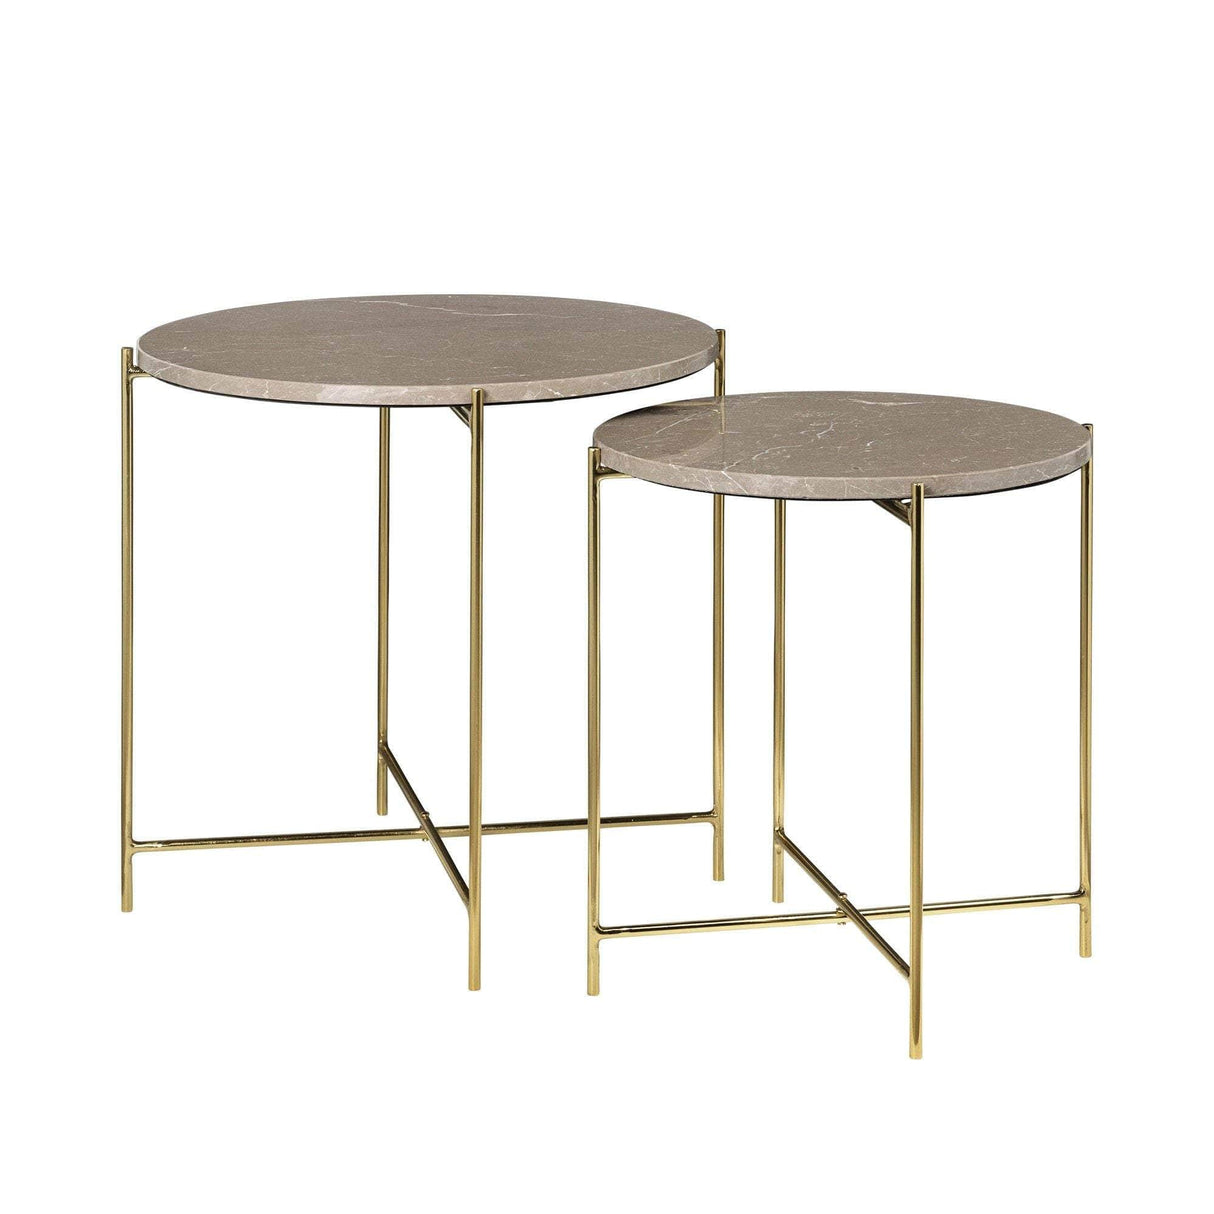 Cozy Living Freja Marble Table - TOFFEE,BRASS - Set of 2